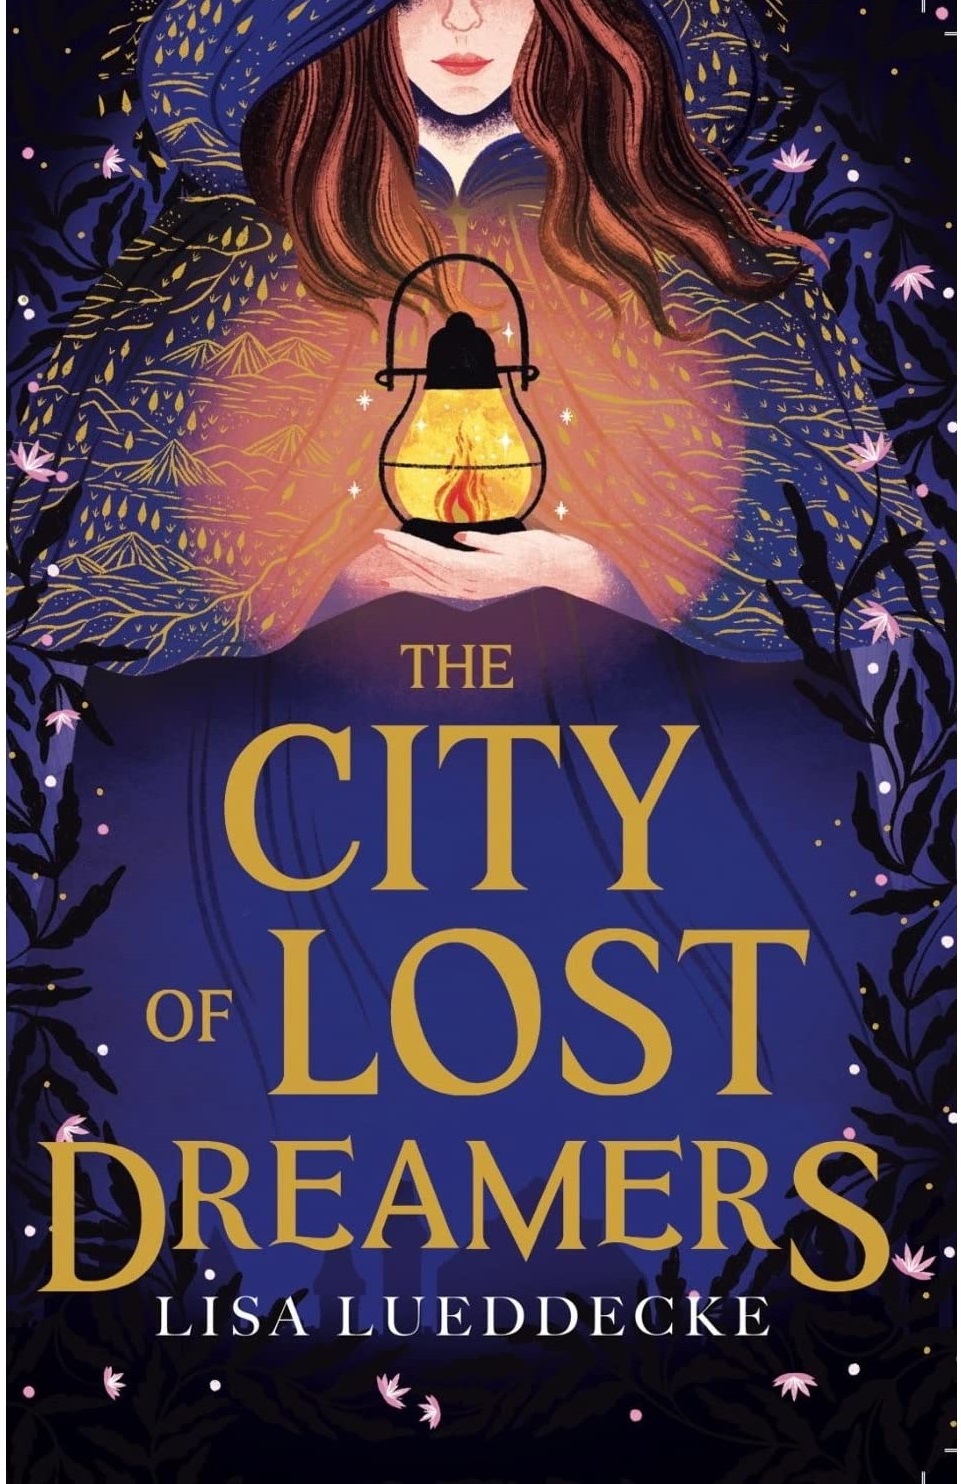 The City of Lost Dreamers